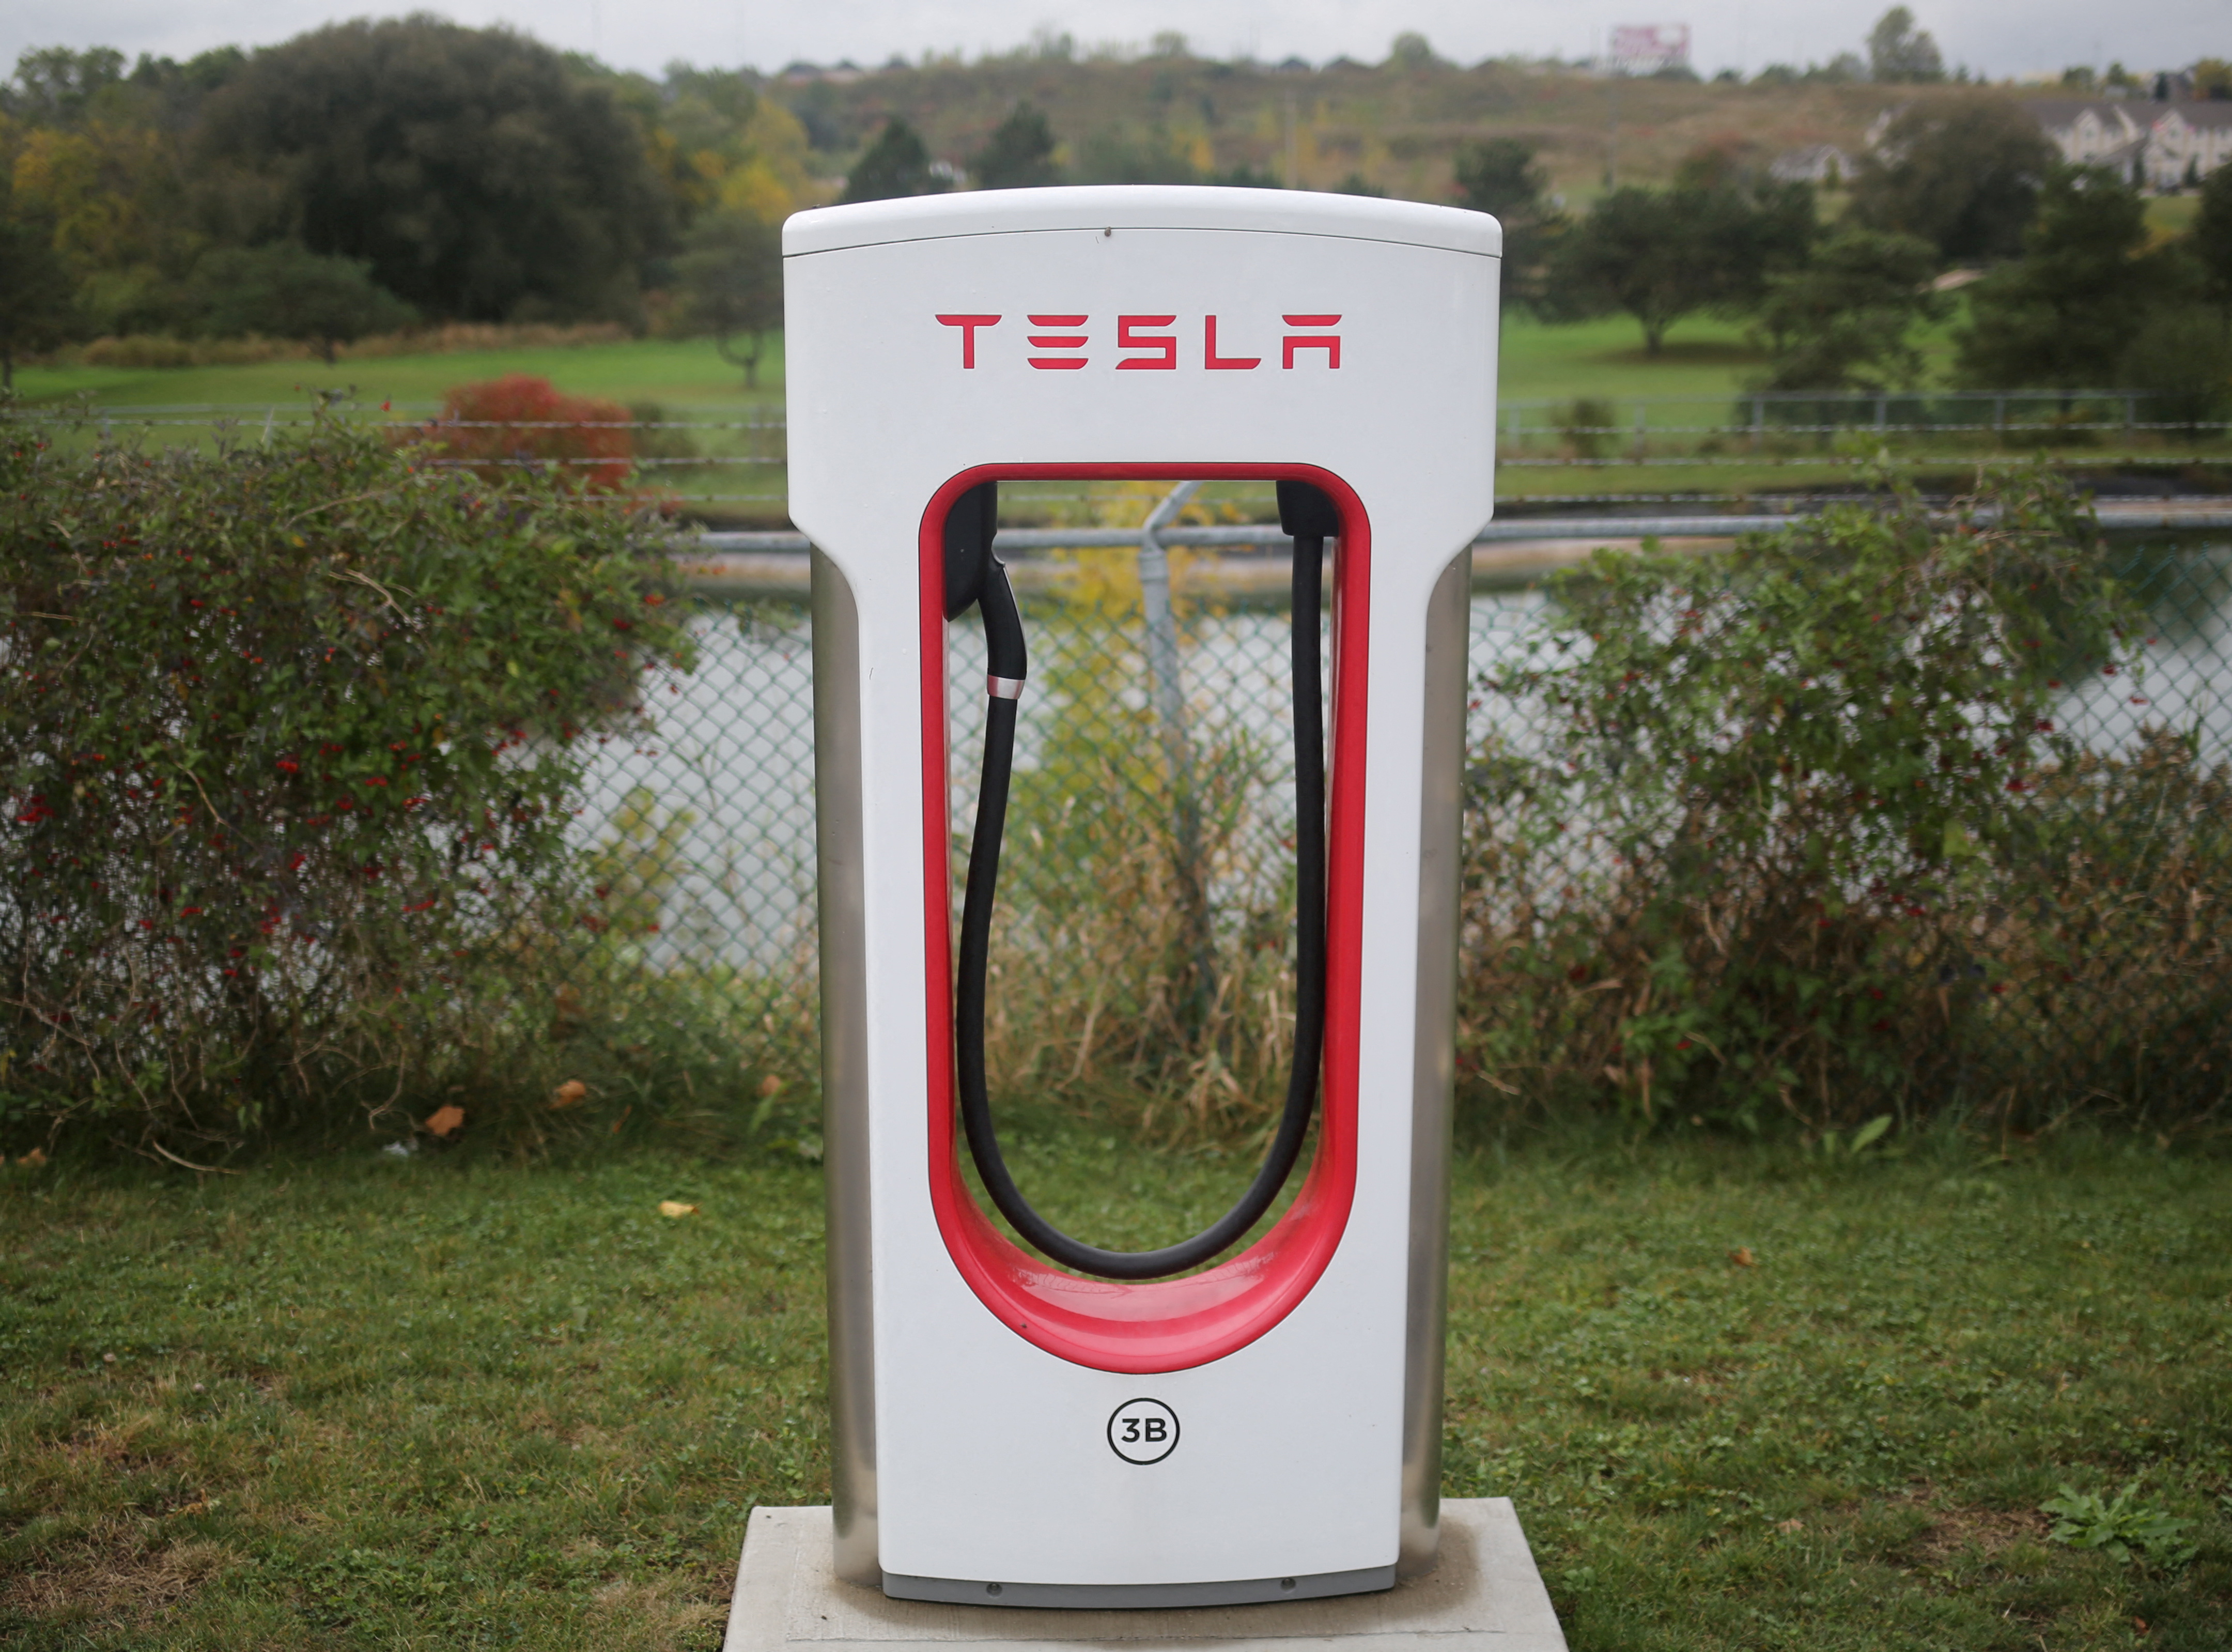 A Tesla electric vehicle charger is seen at the edge of a parking lot in Kitchener